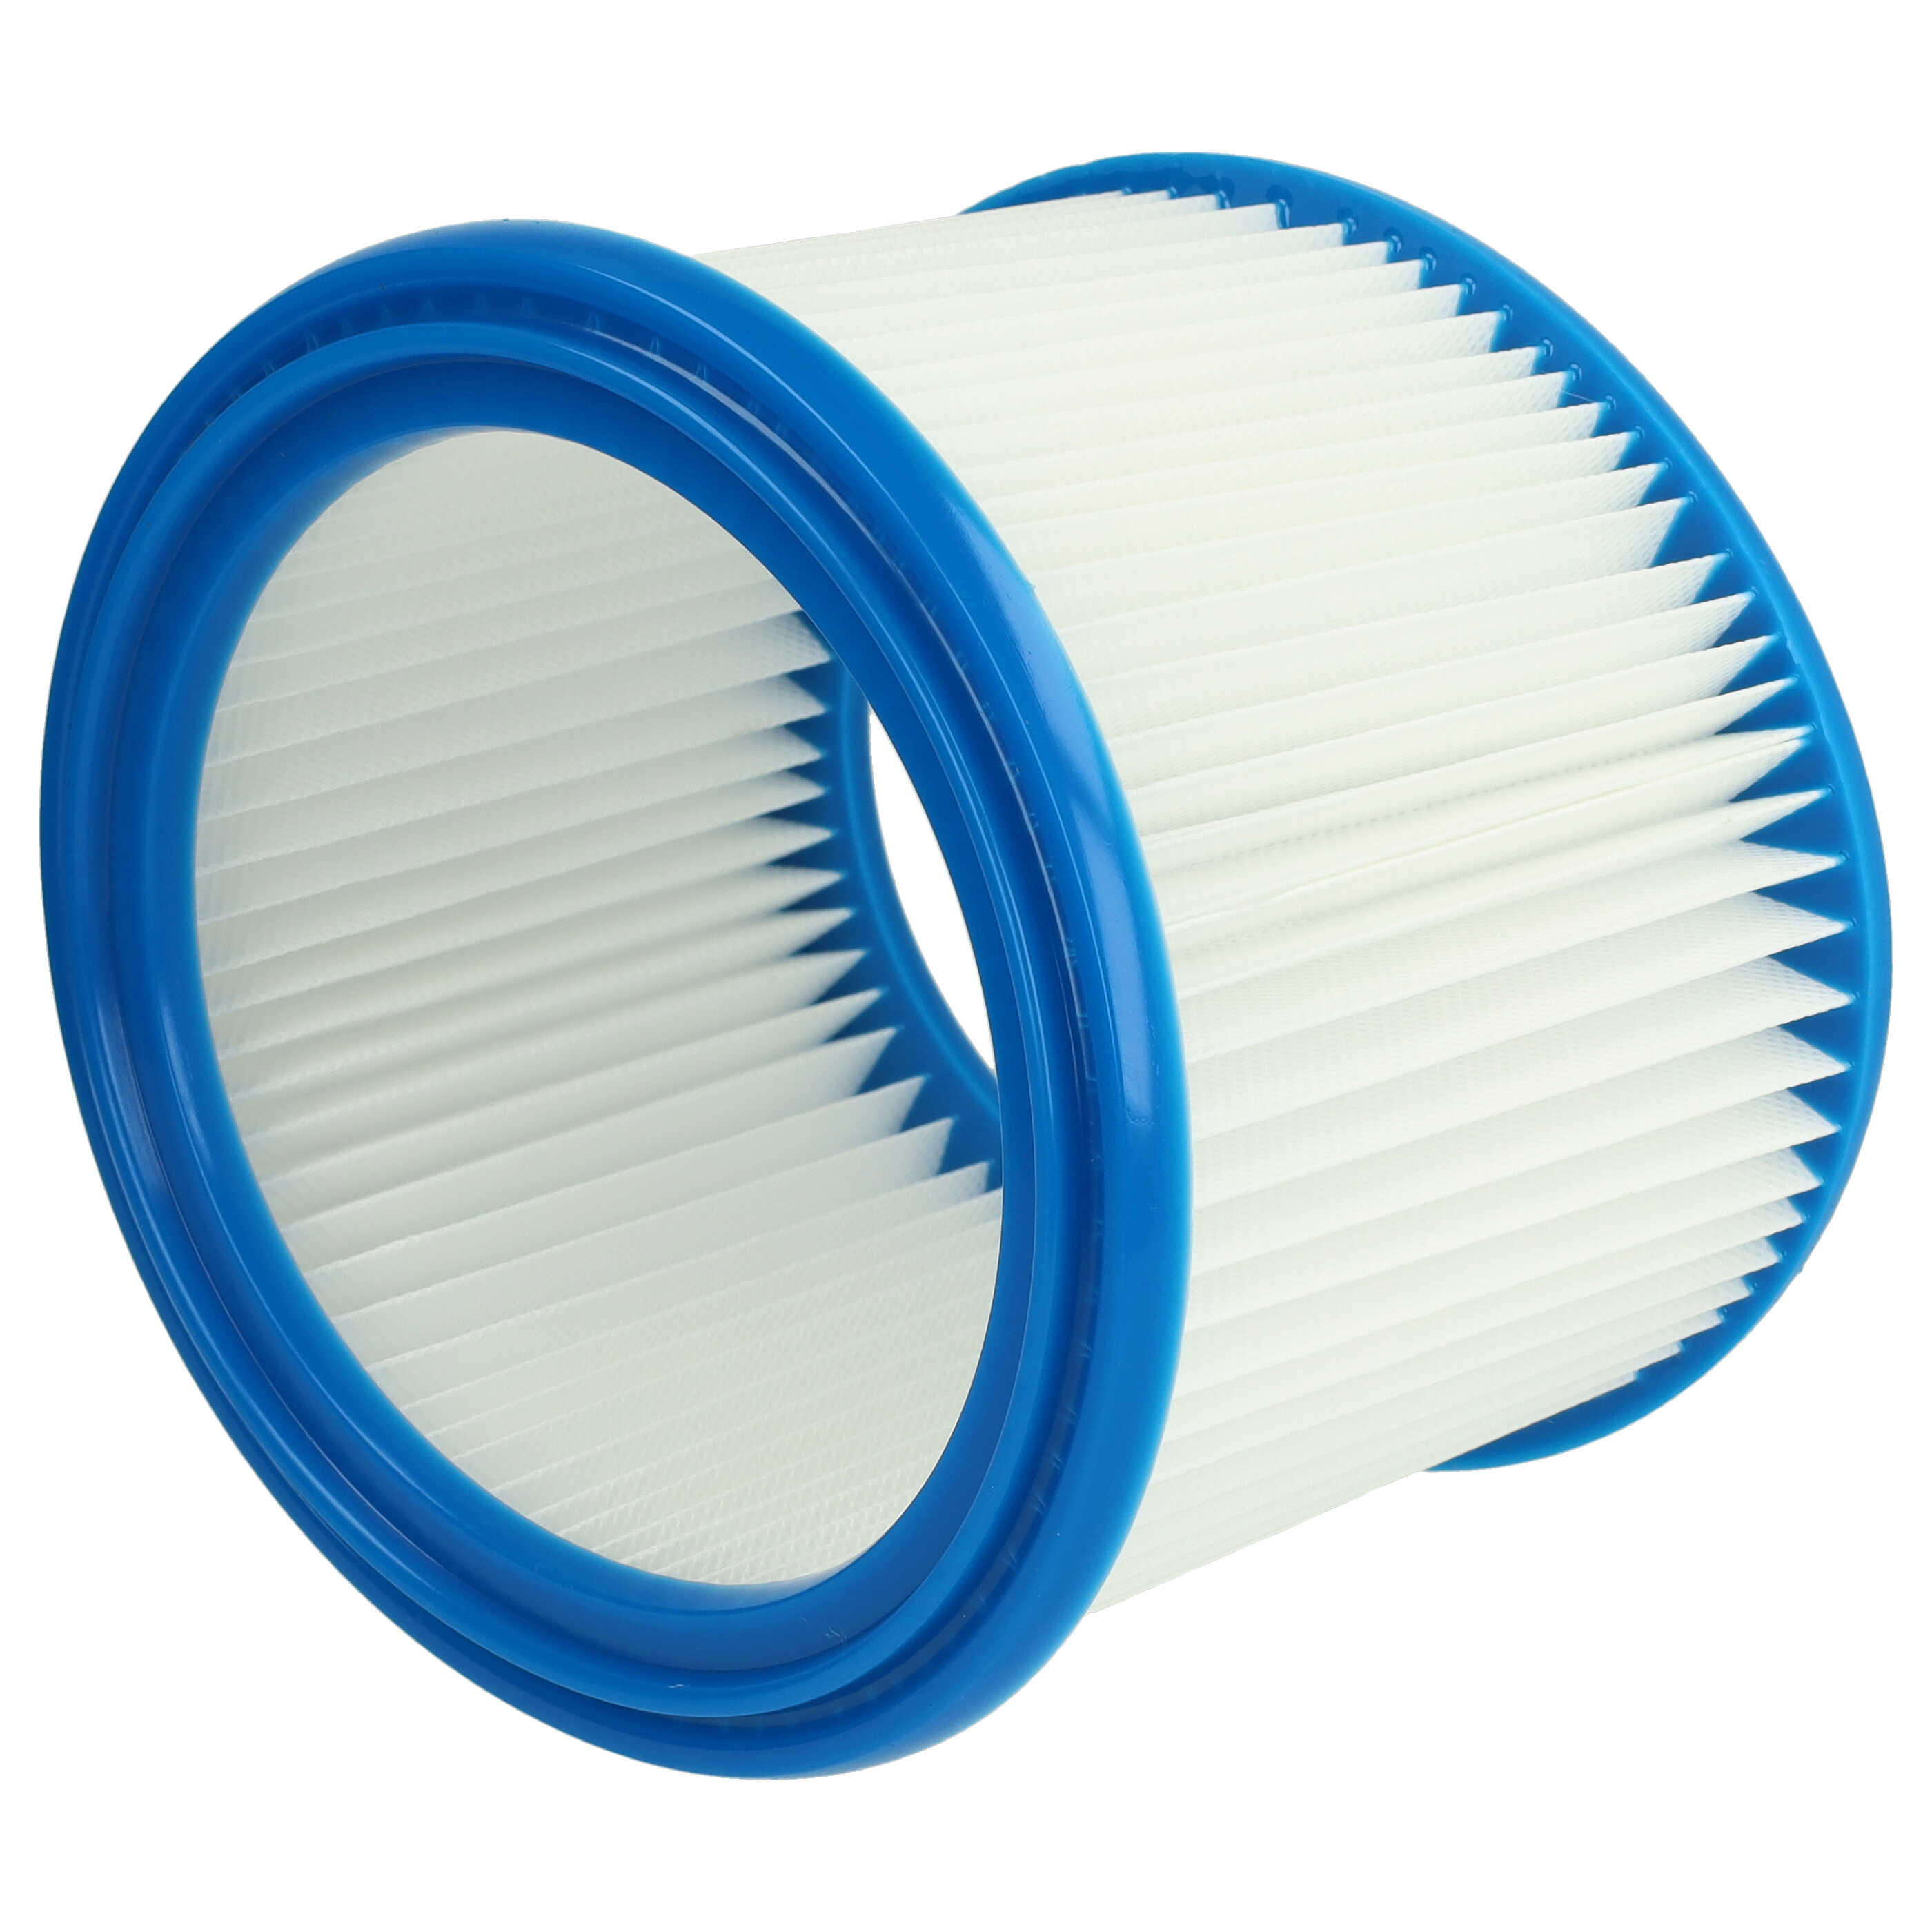 10x round filter replaces Bosch 2607432024 for BoschVacuum Cleaner, white / blue